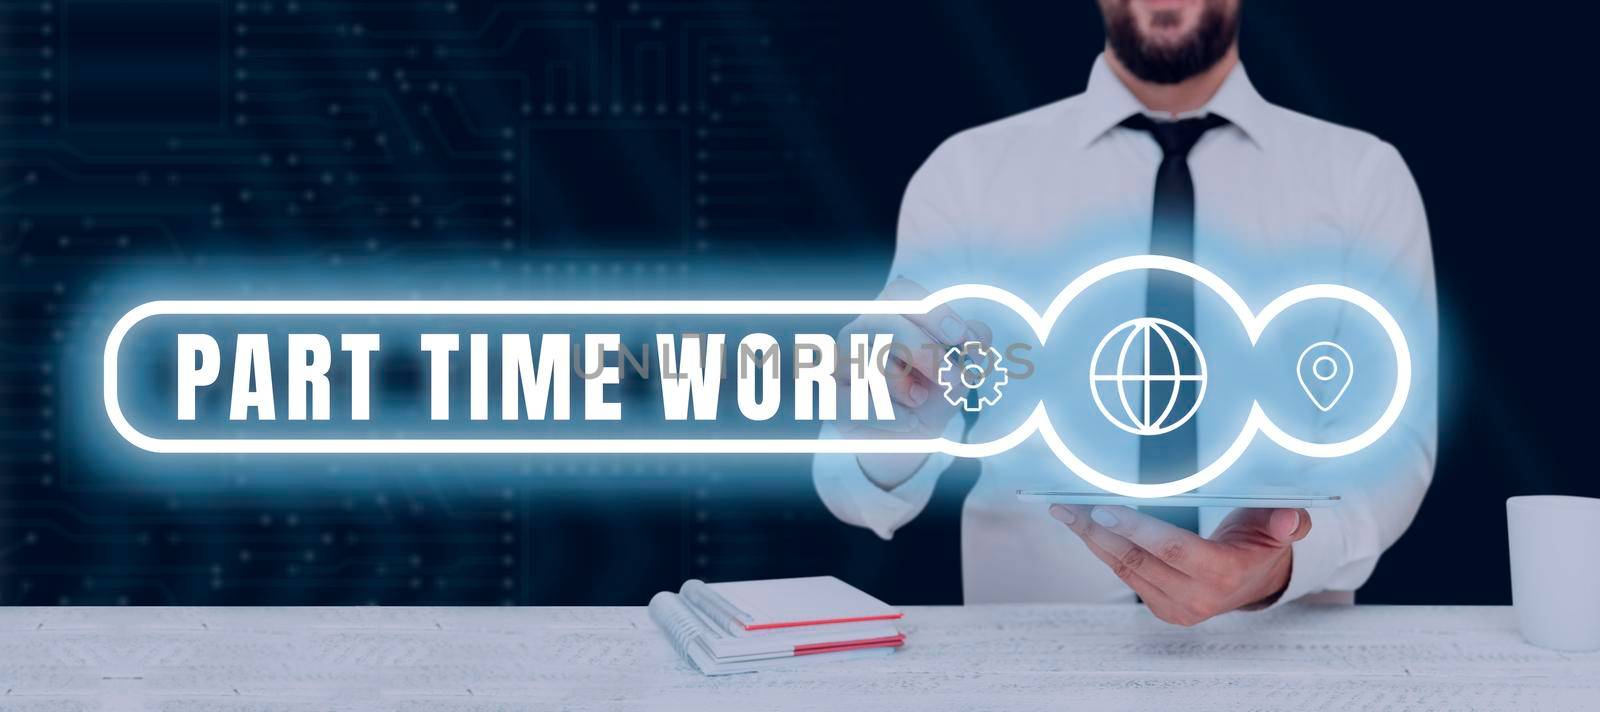 Text sign showing Part Time Work, Concept meaning A job that is not permanent but able to perform well Important Message Presented On Piece Of Paper Clipped With Clip.